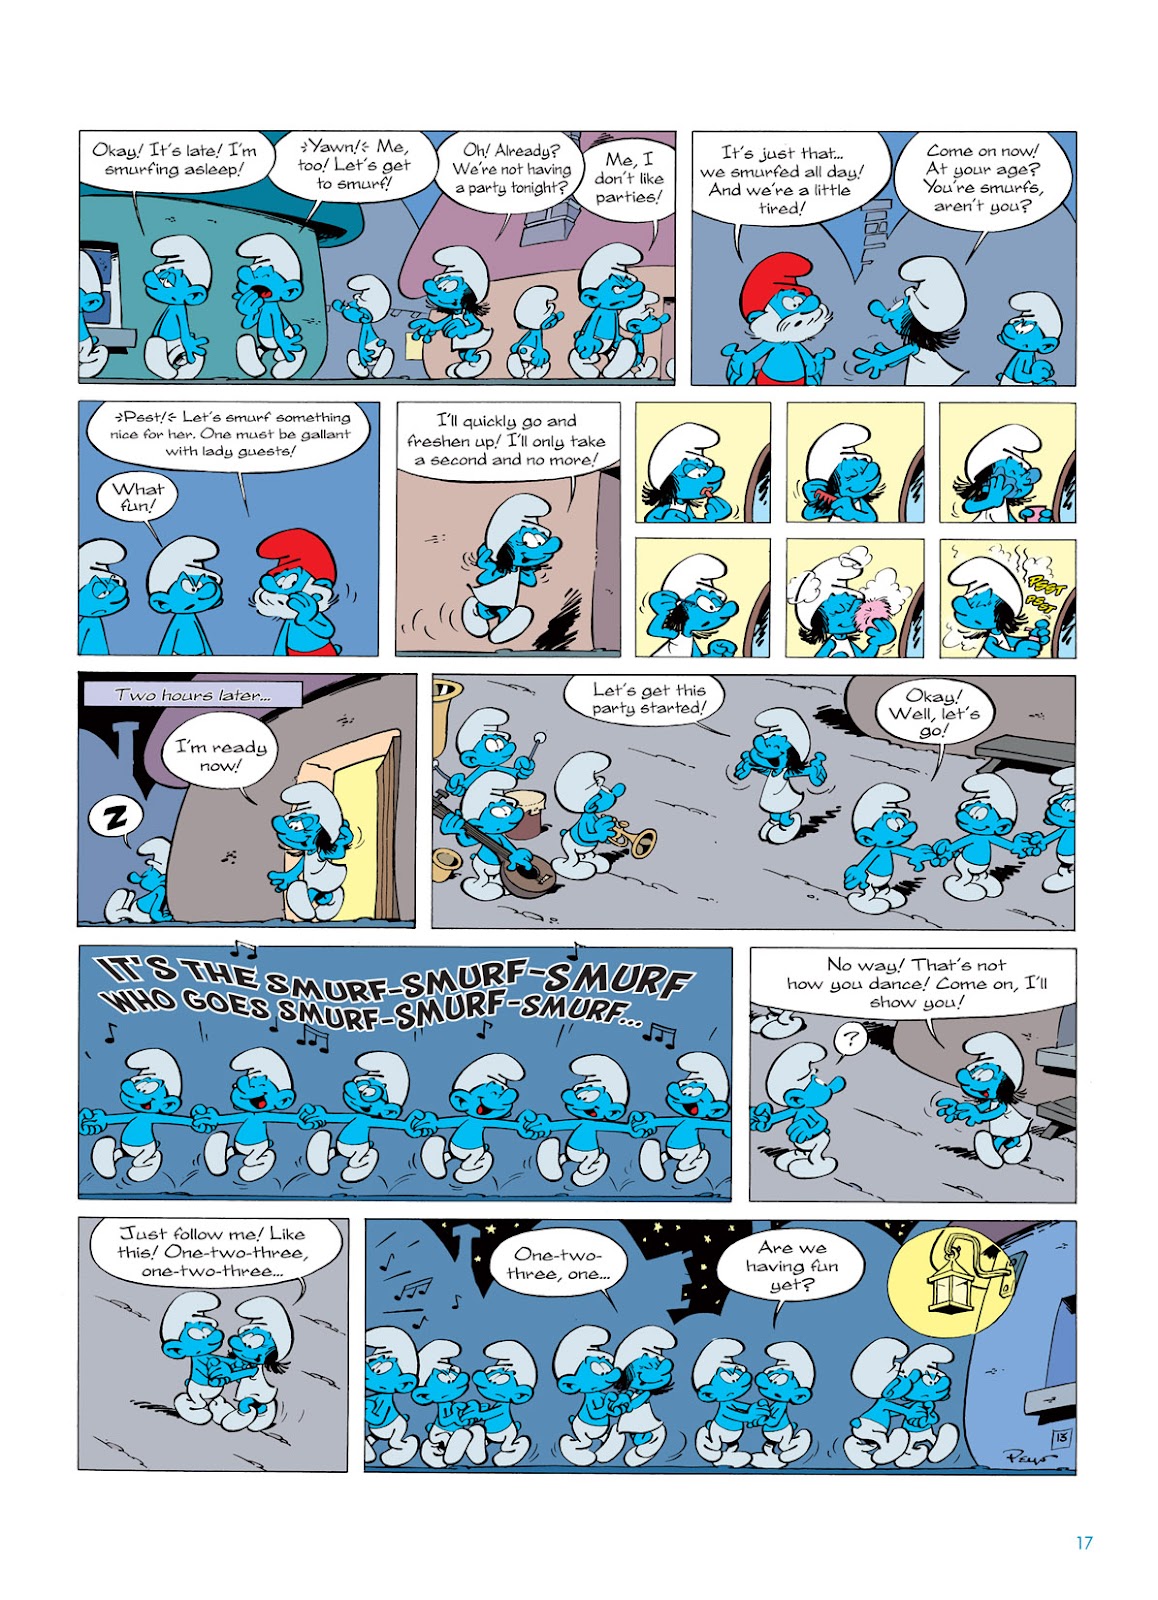 Read online The Smurfs comic -  Issue #4 - 17